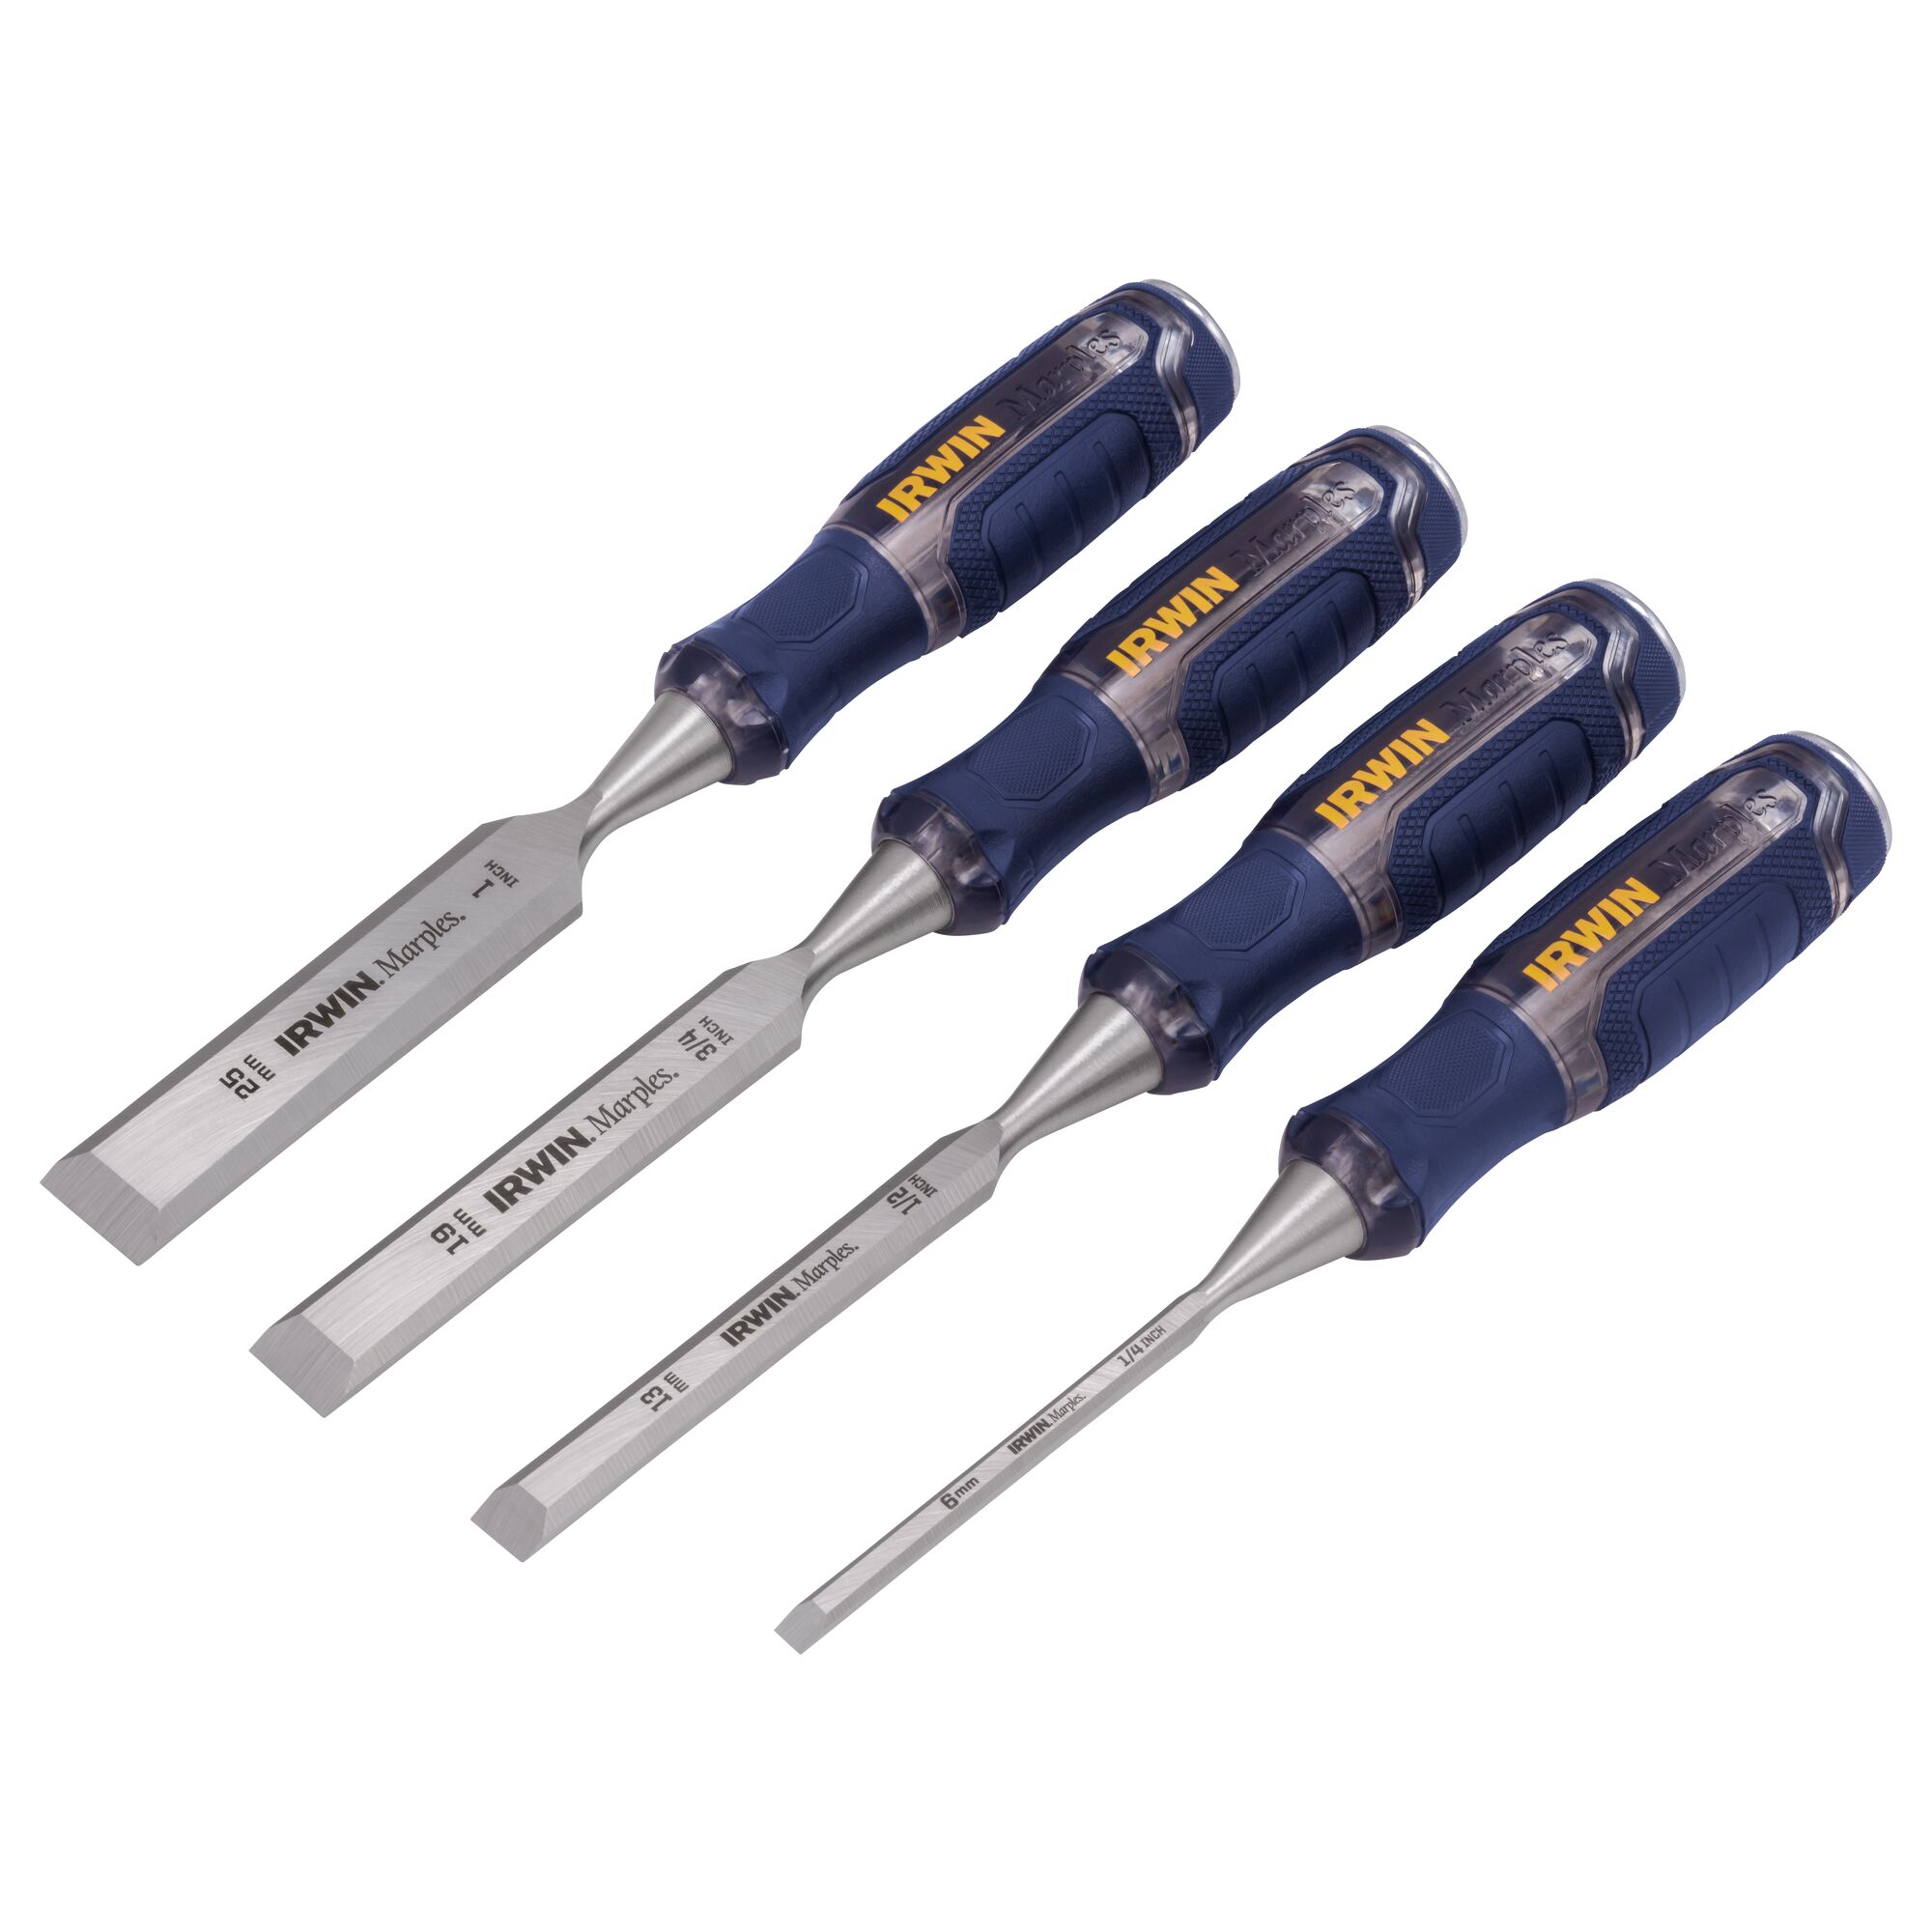 Irwin 1819361 4 Piece Construction Chisel Set 1/4 1/2 3/4 and 1